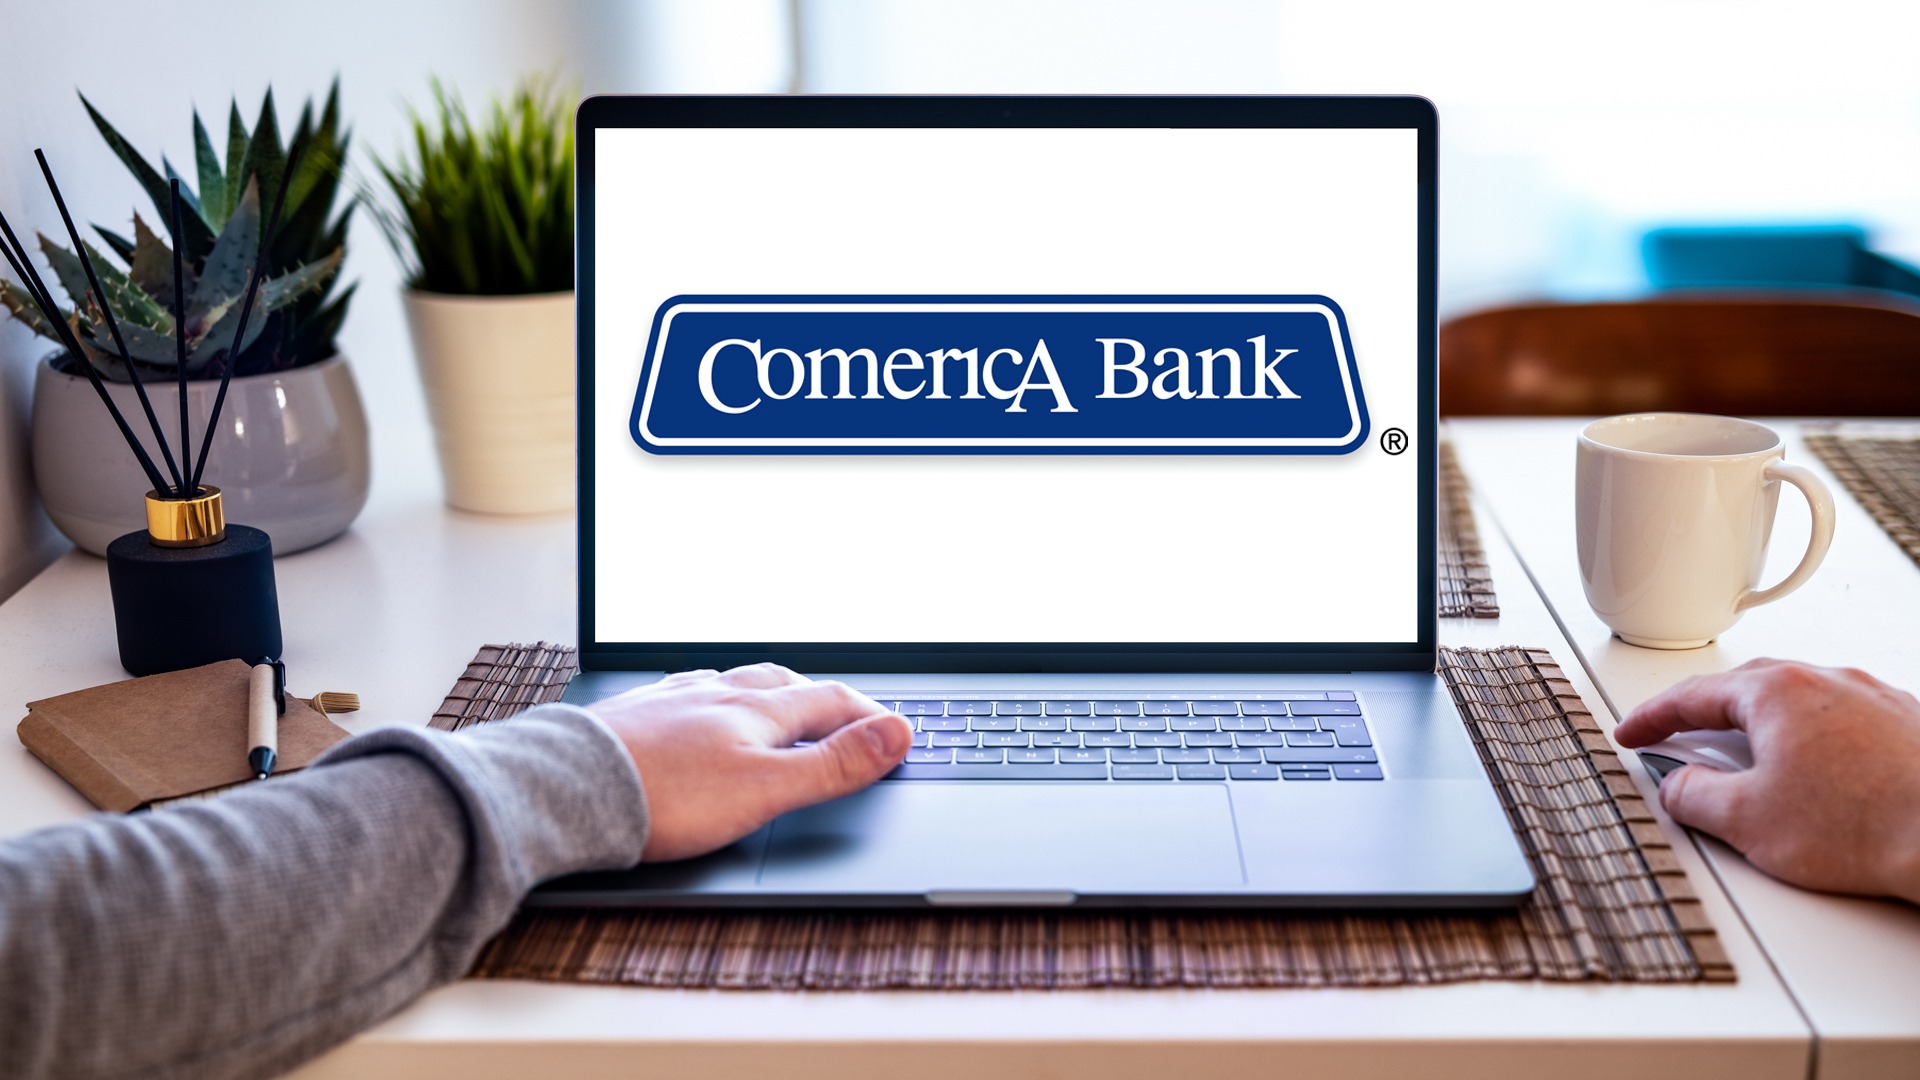 Comerica Bank Login: Online Banking, Credit Card & Make Payments At www.comerica.com